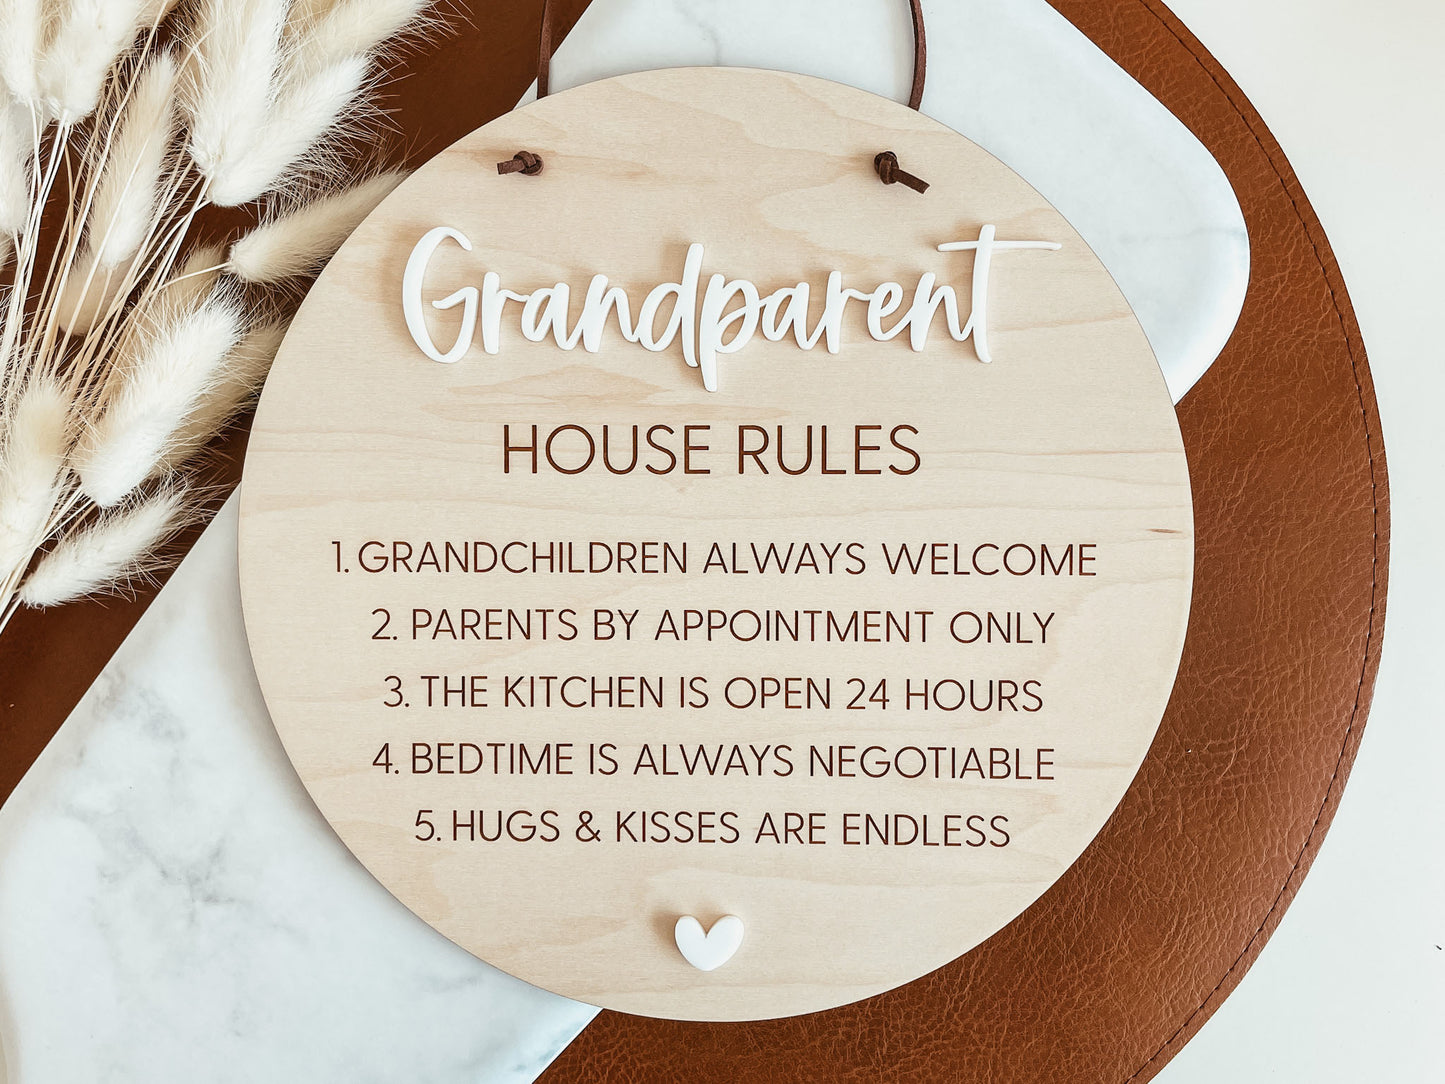 Grandparent House Rules Engraved Pennant Sign